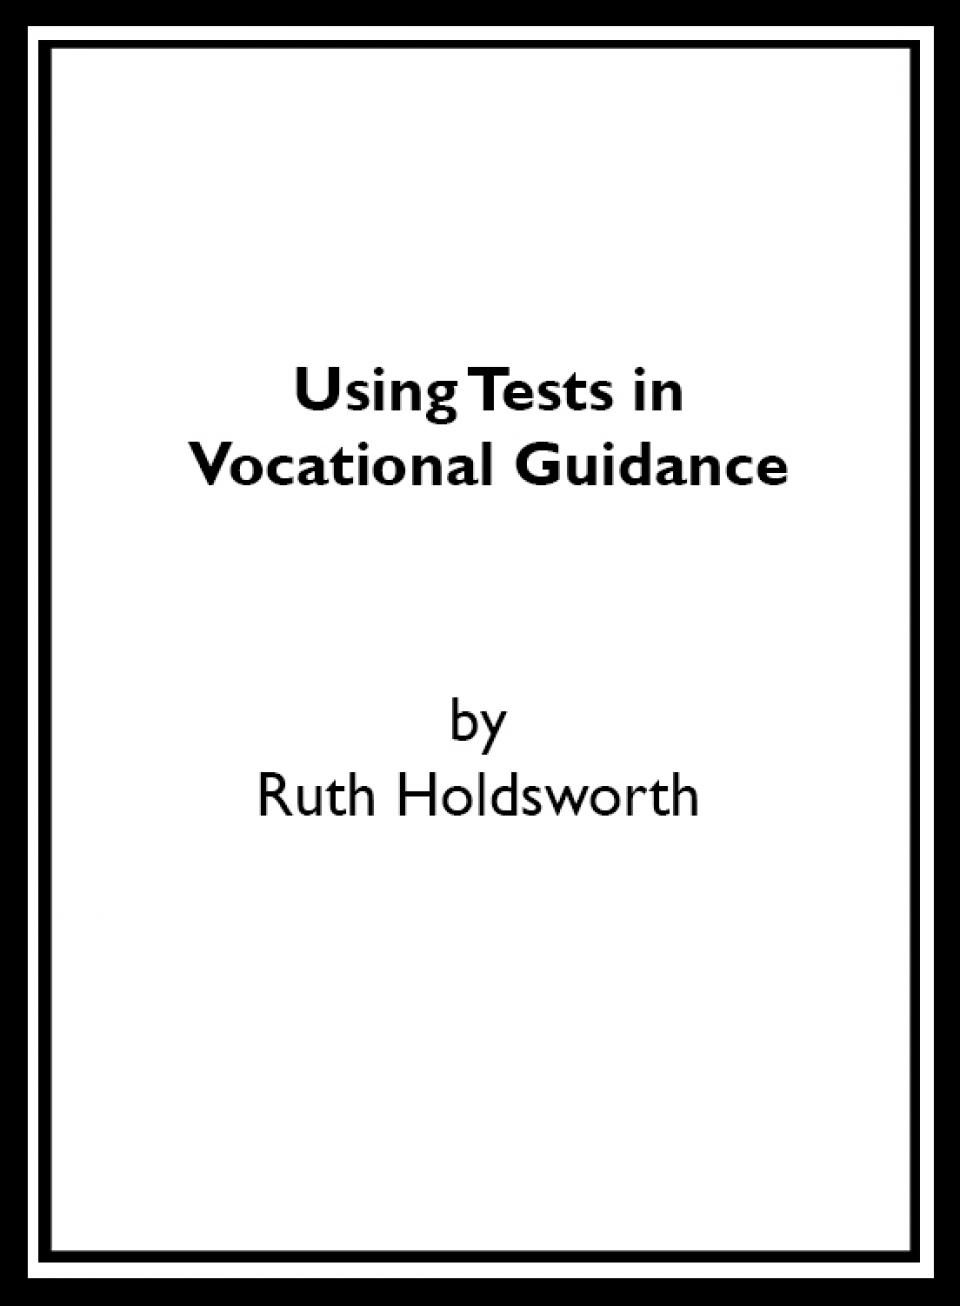 Using tests in Vocational Guidance